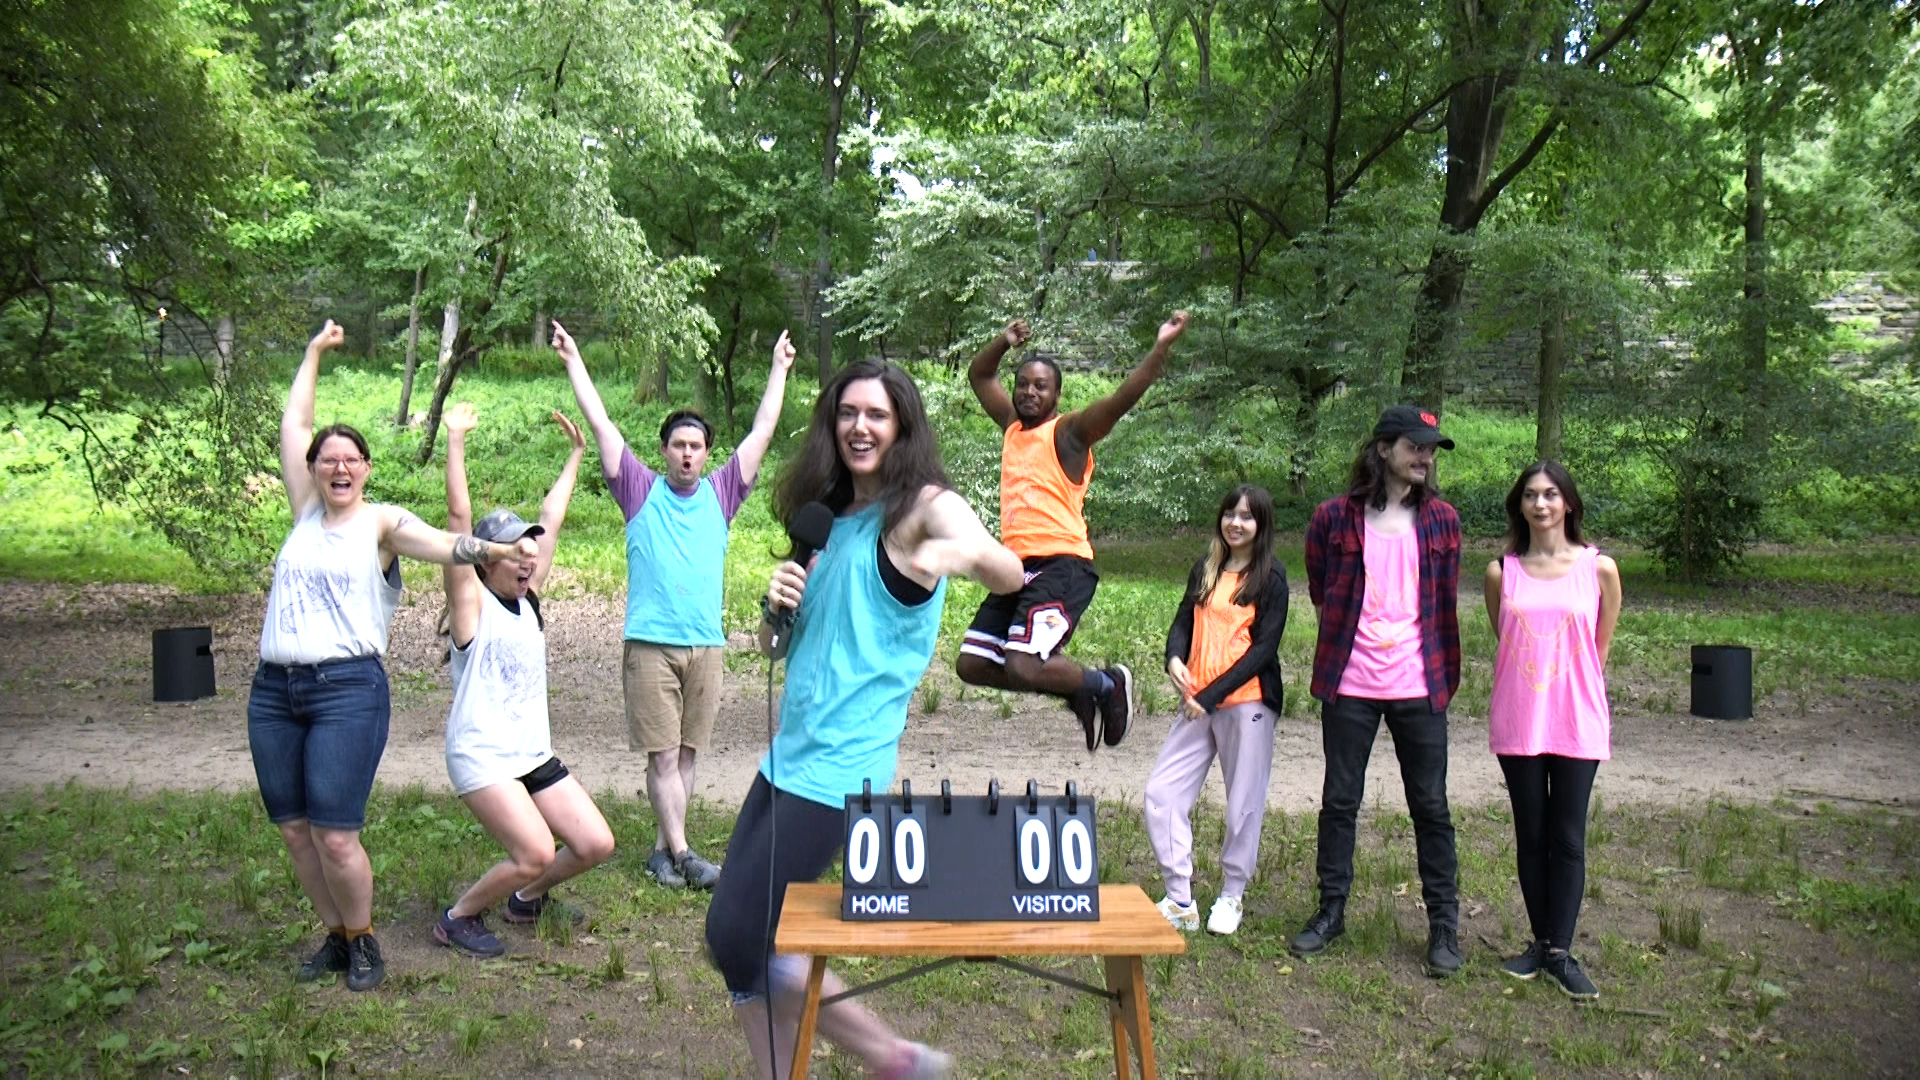 Eight people stand in a park with KanJam cans behind them and a scoreboard in front of them. Some of the people are cheering or jumping in the air.